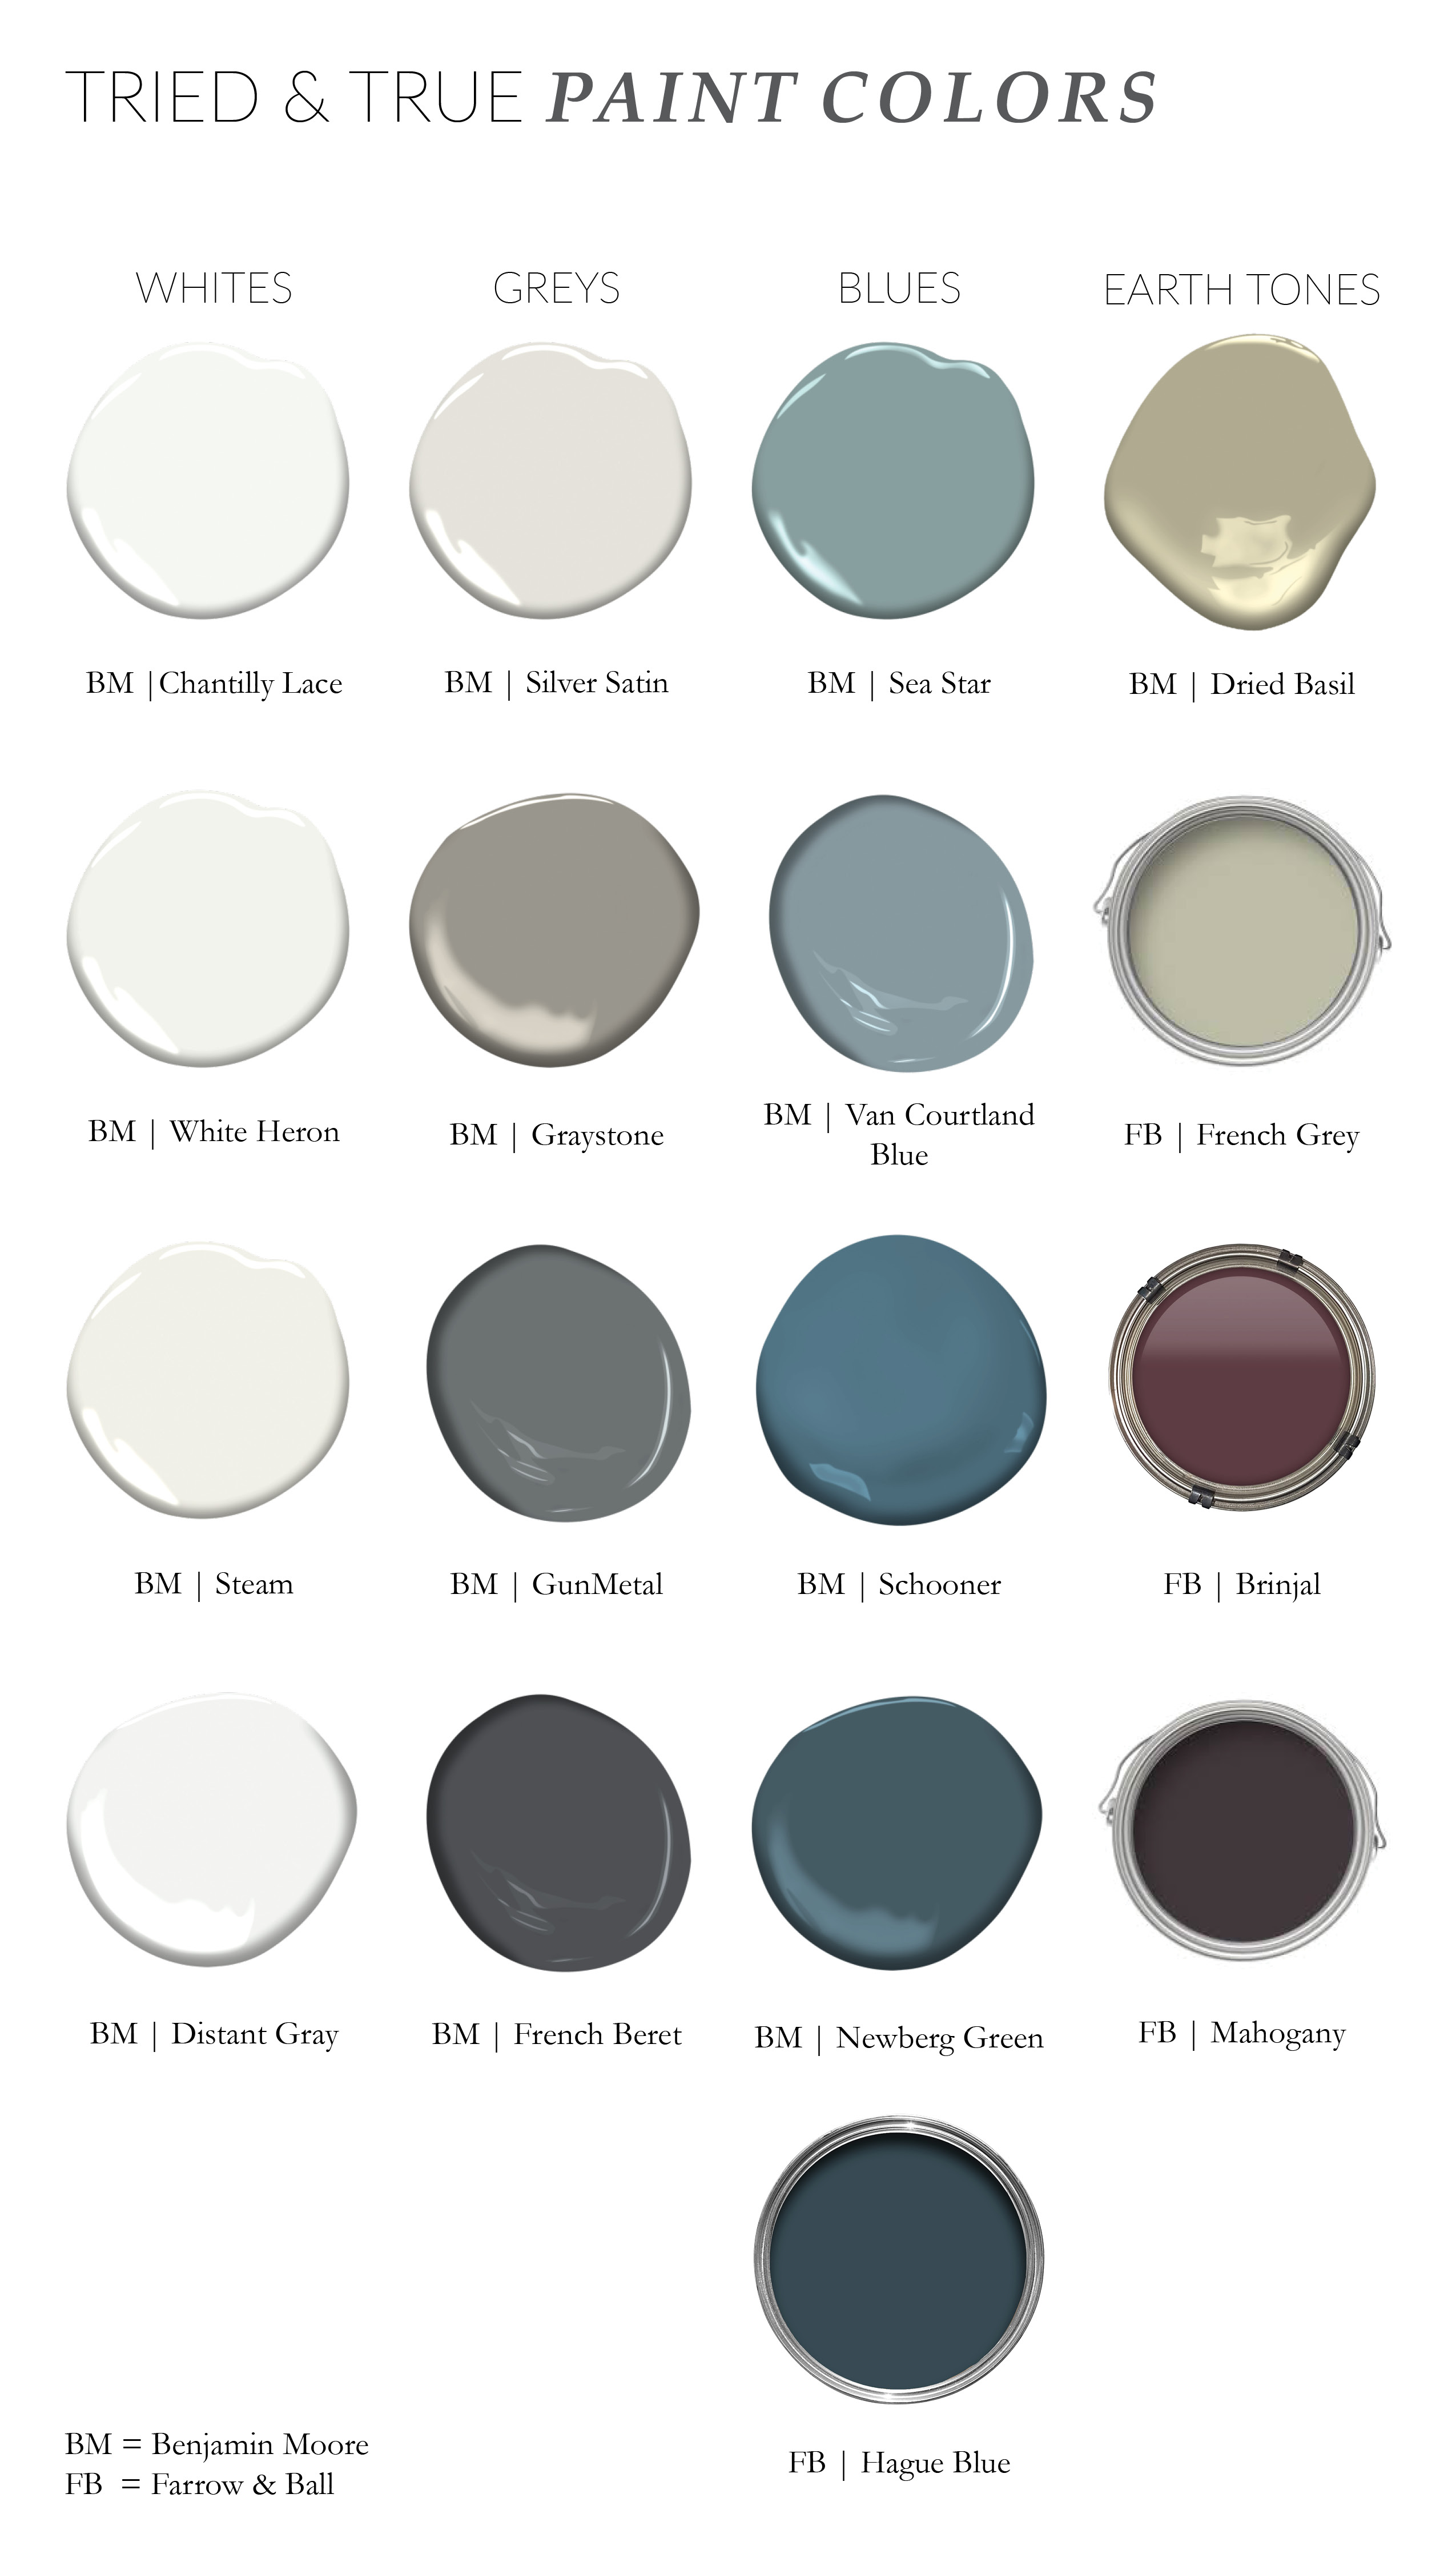 Tried & True Paint Colors | LDa Architecture and Interiors